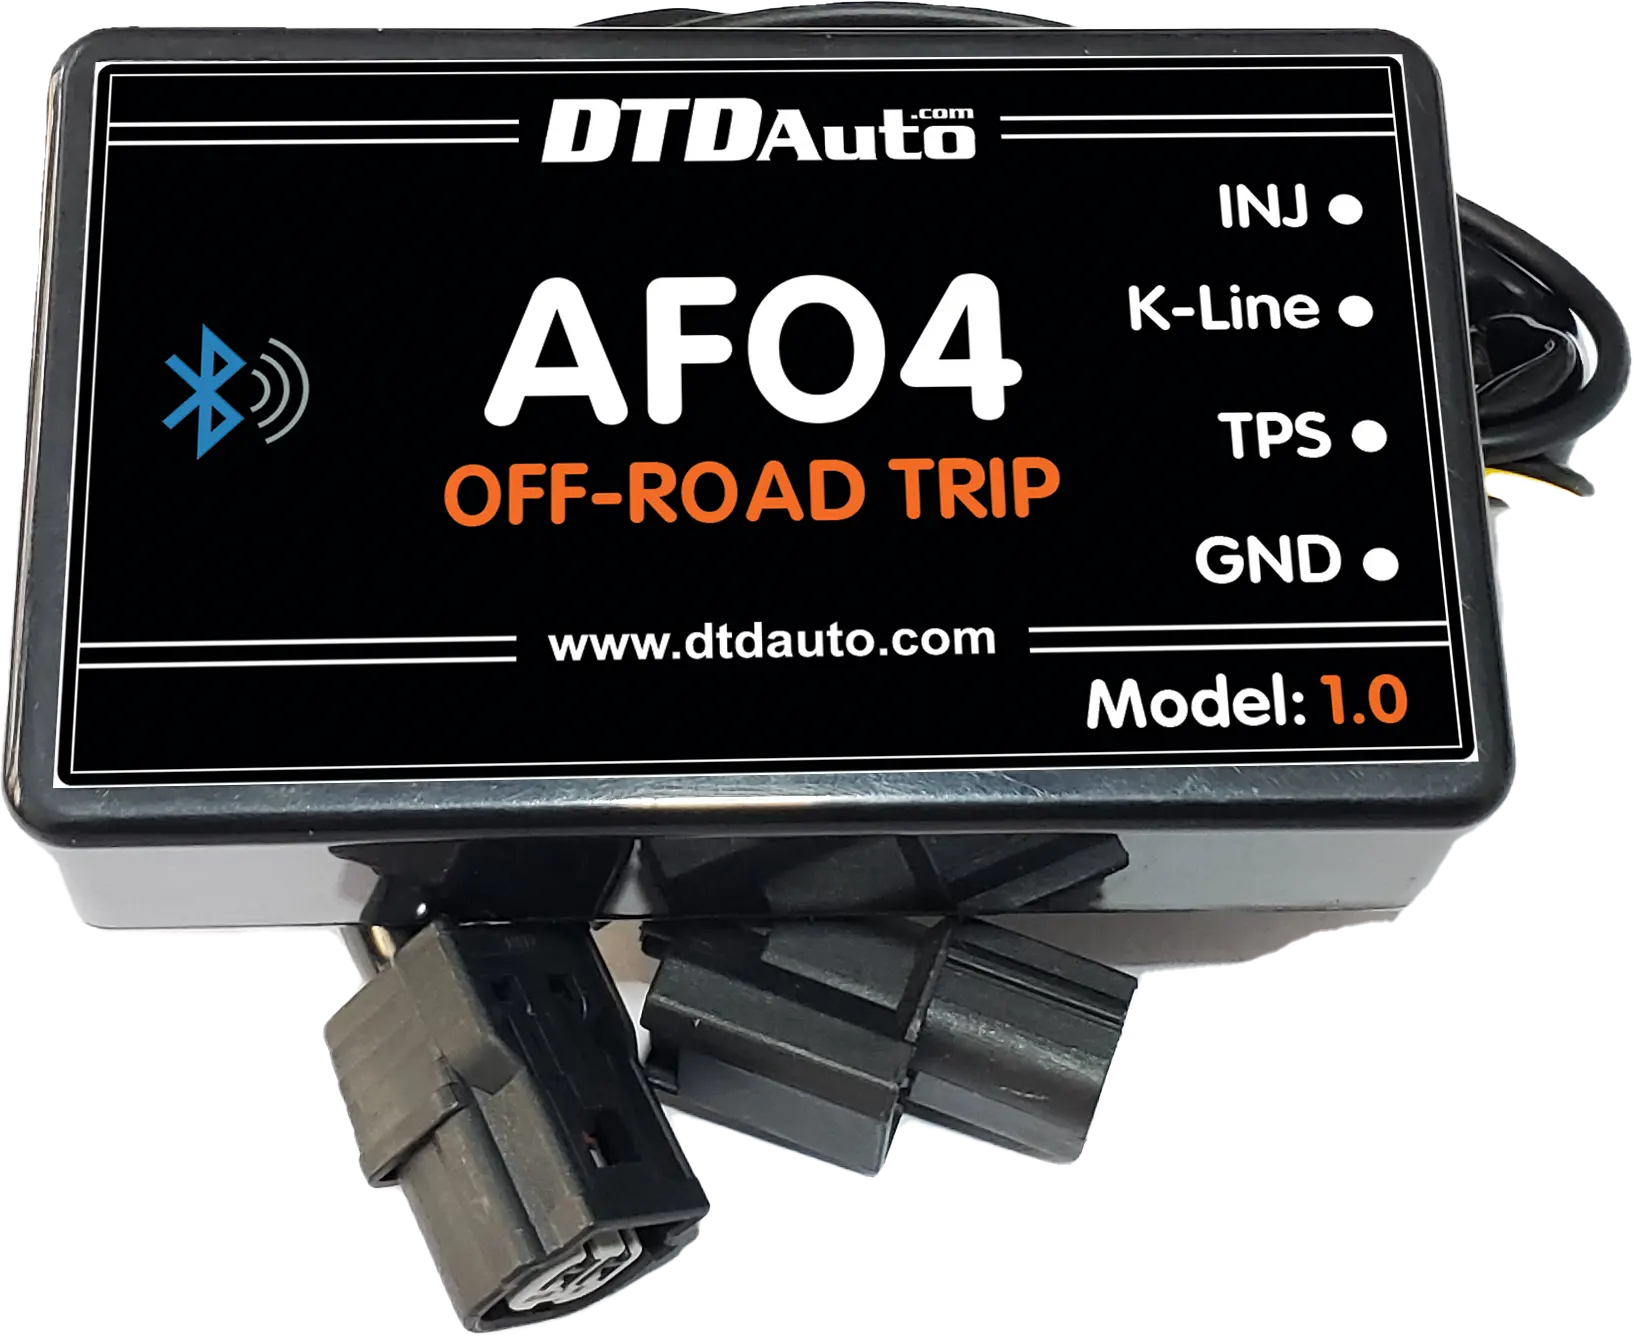 AFO4 TRIP- Accessory Integrated Google Map to Track the journey and navigate on the same smartphone screen